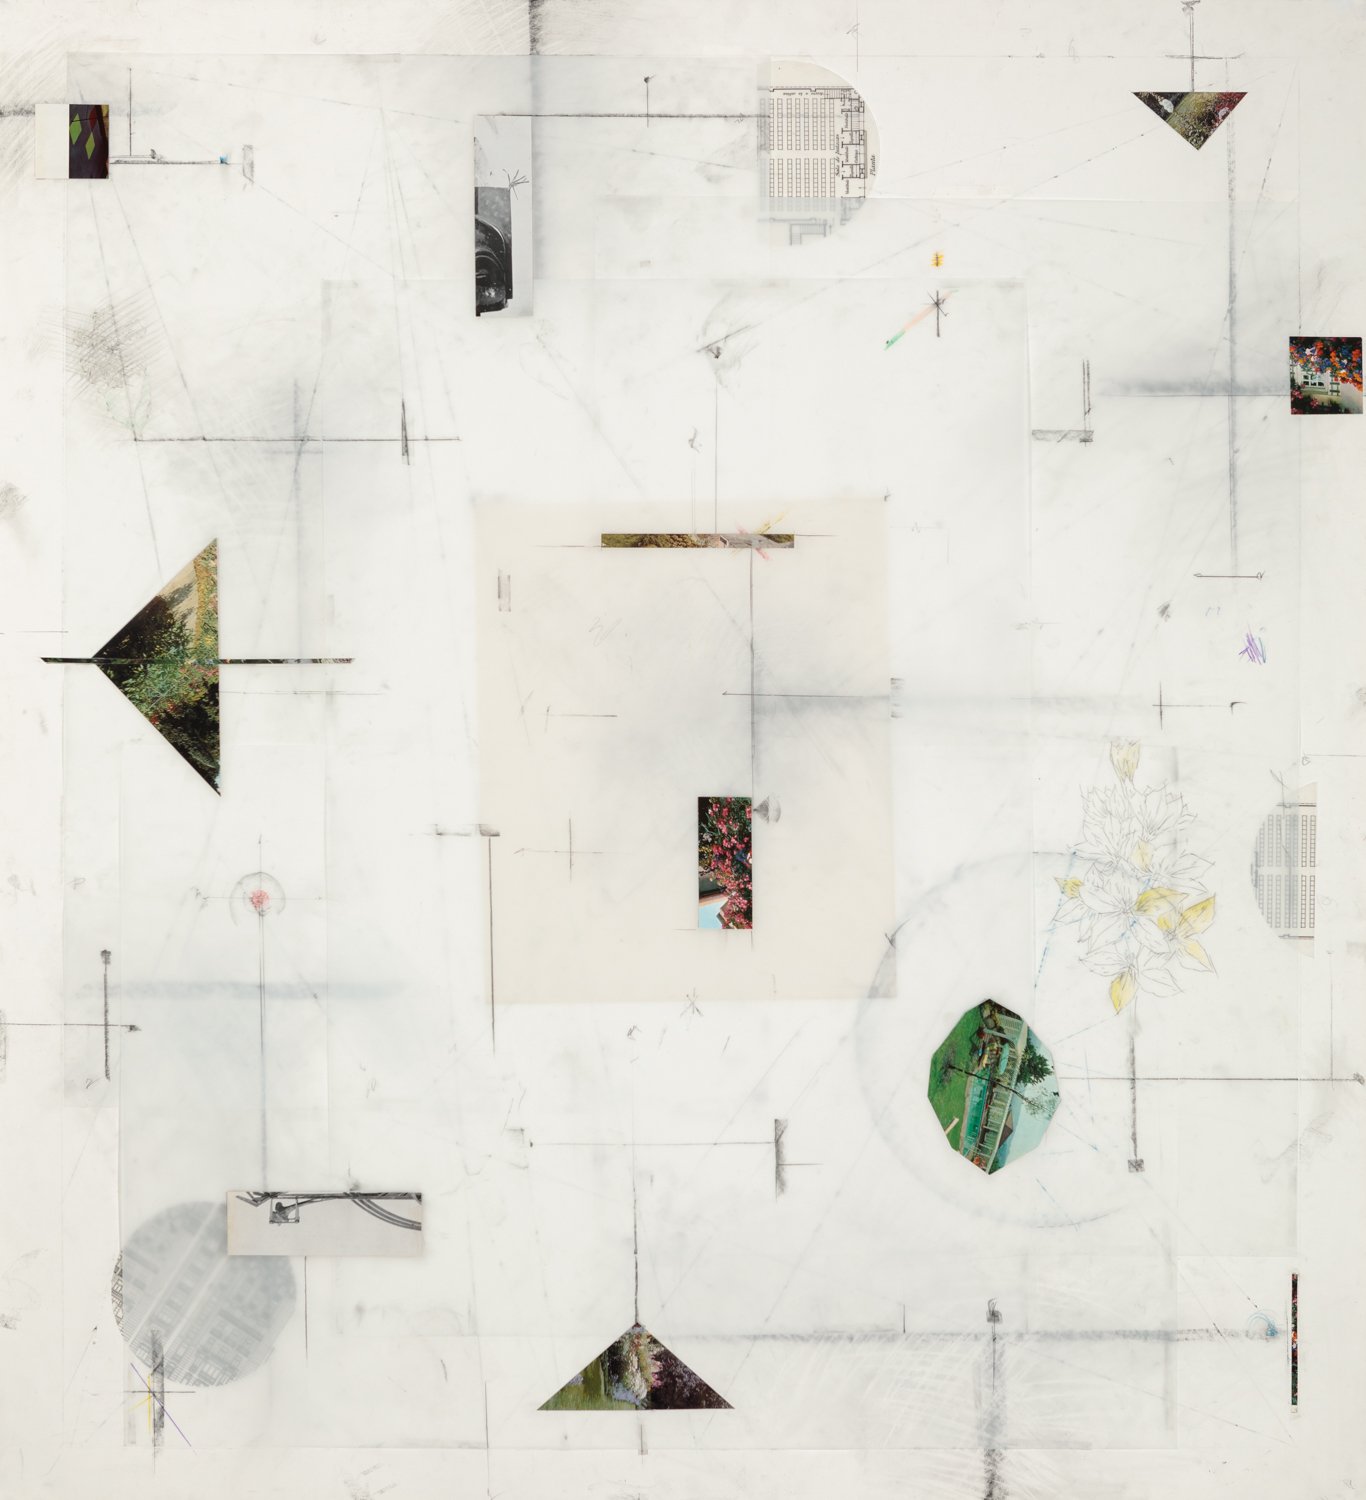  Untitled, 2021, graphite, colored pencil and collage on paper and mylar, 51 x 47 inches/ 130 x 120 cm 